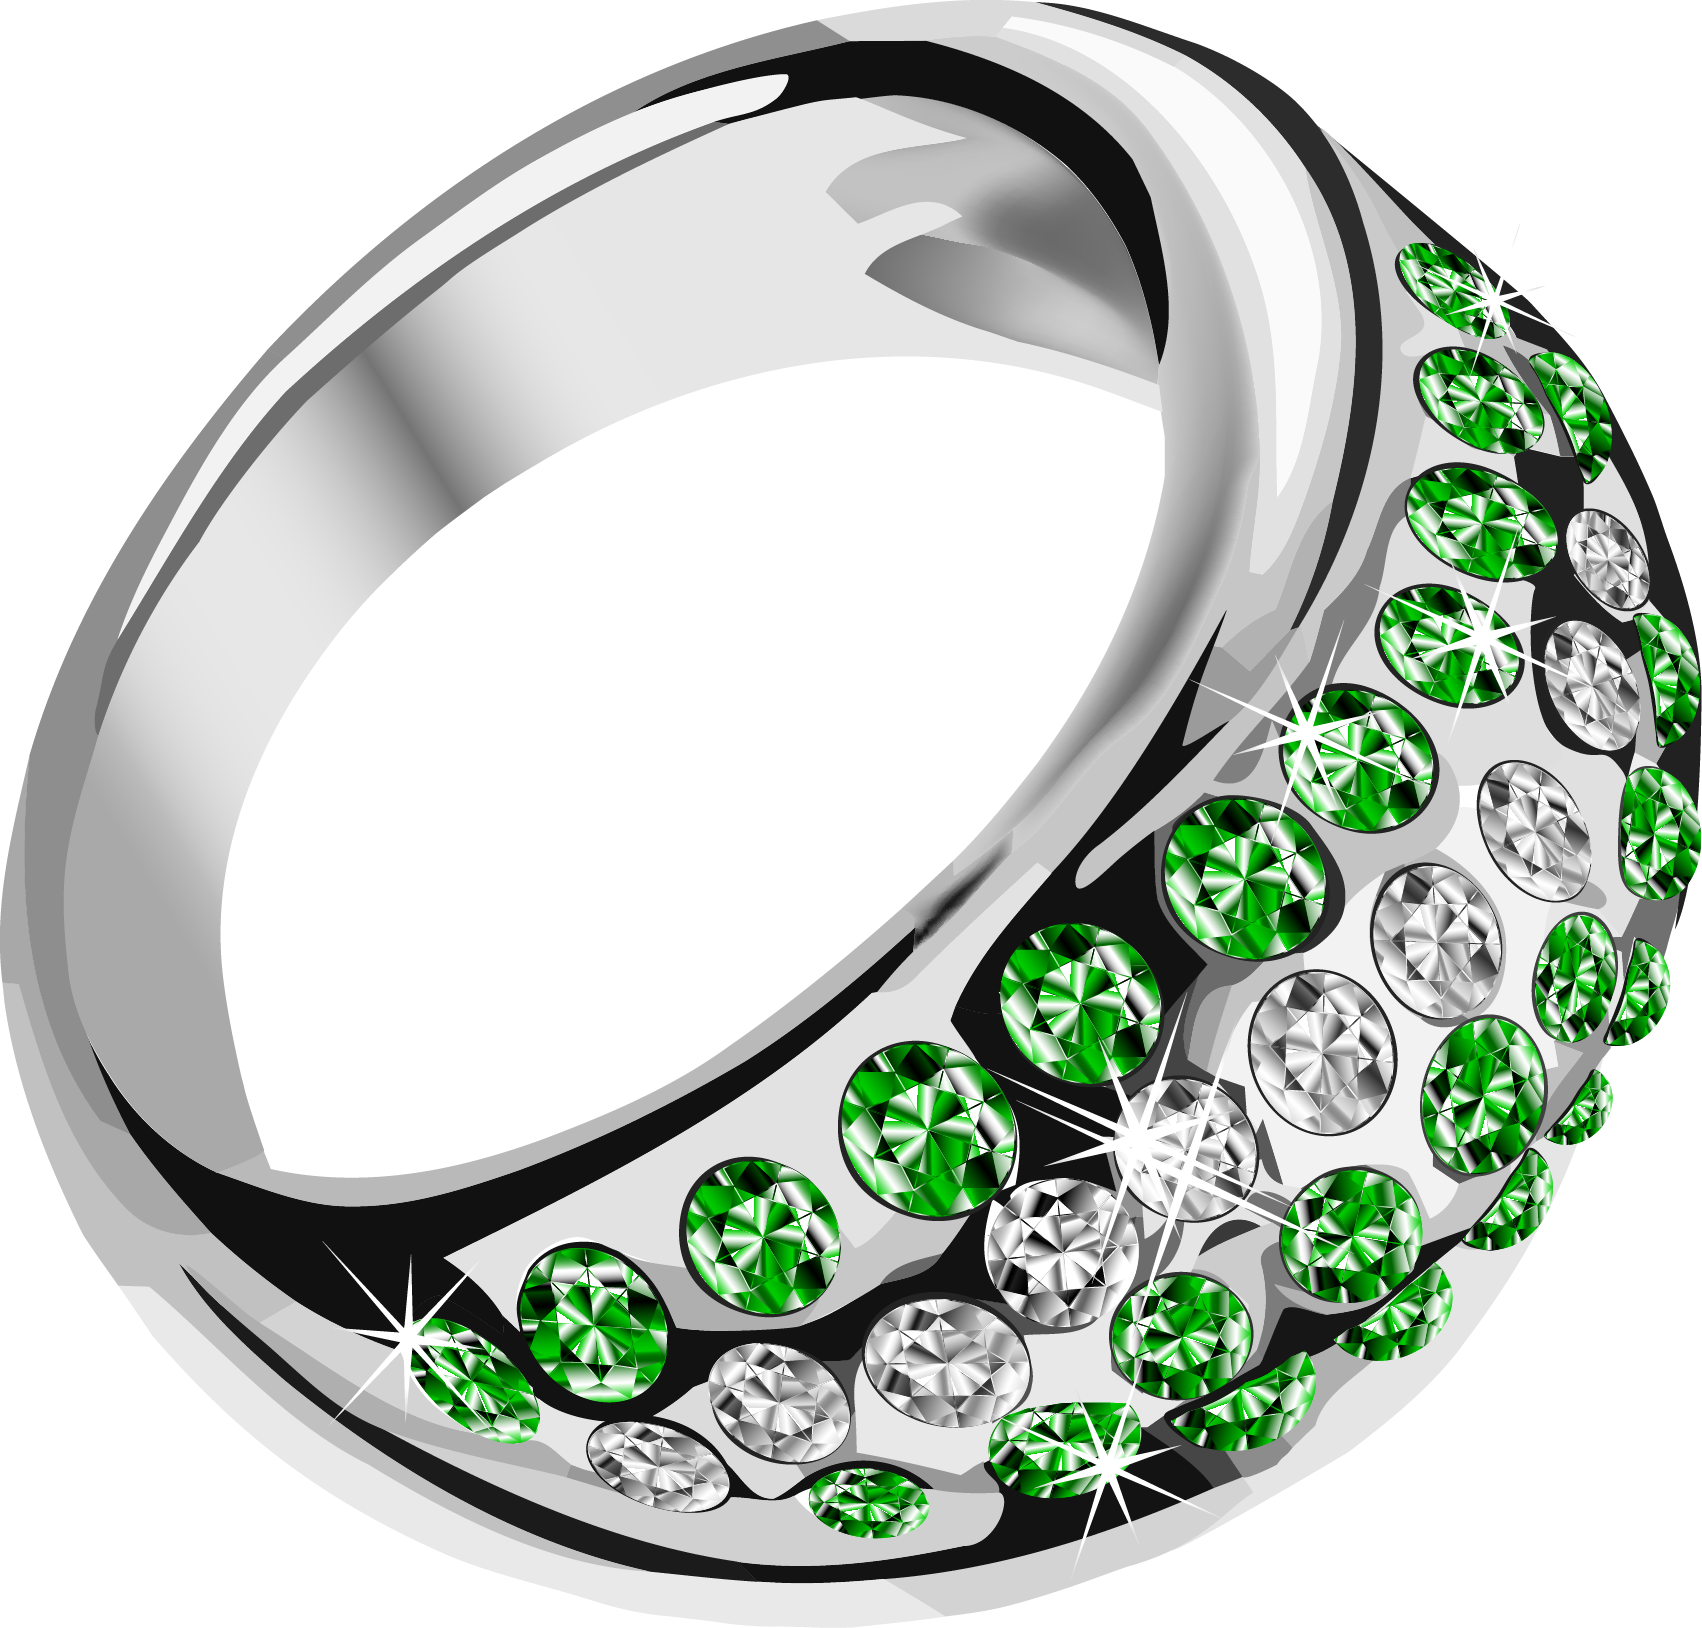 Free Wedding Ring Vector Png, Download Free Wedding Ring Vector Png png